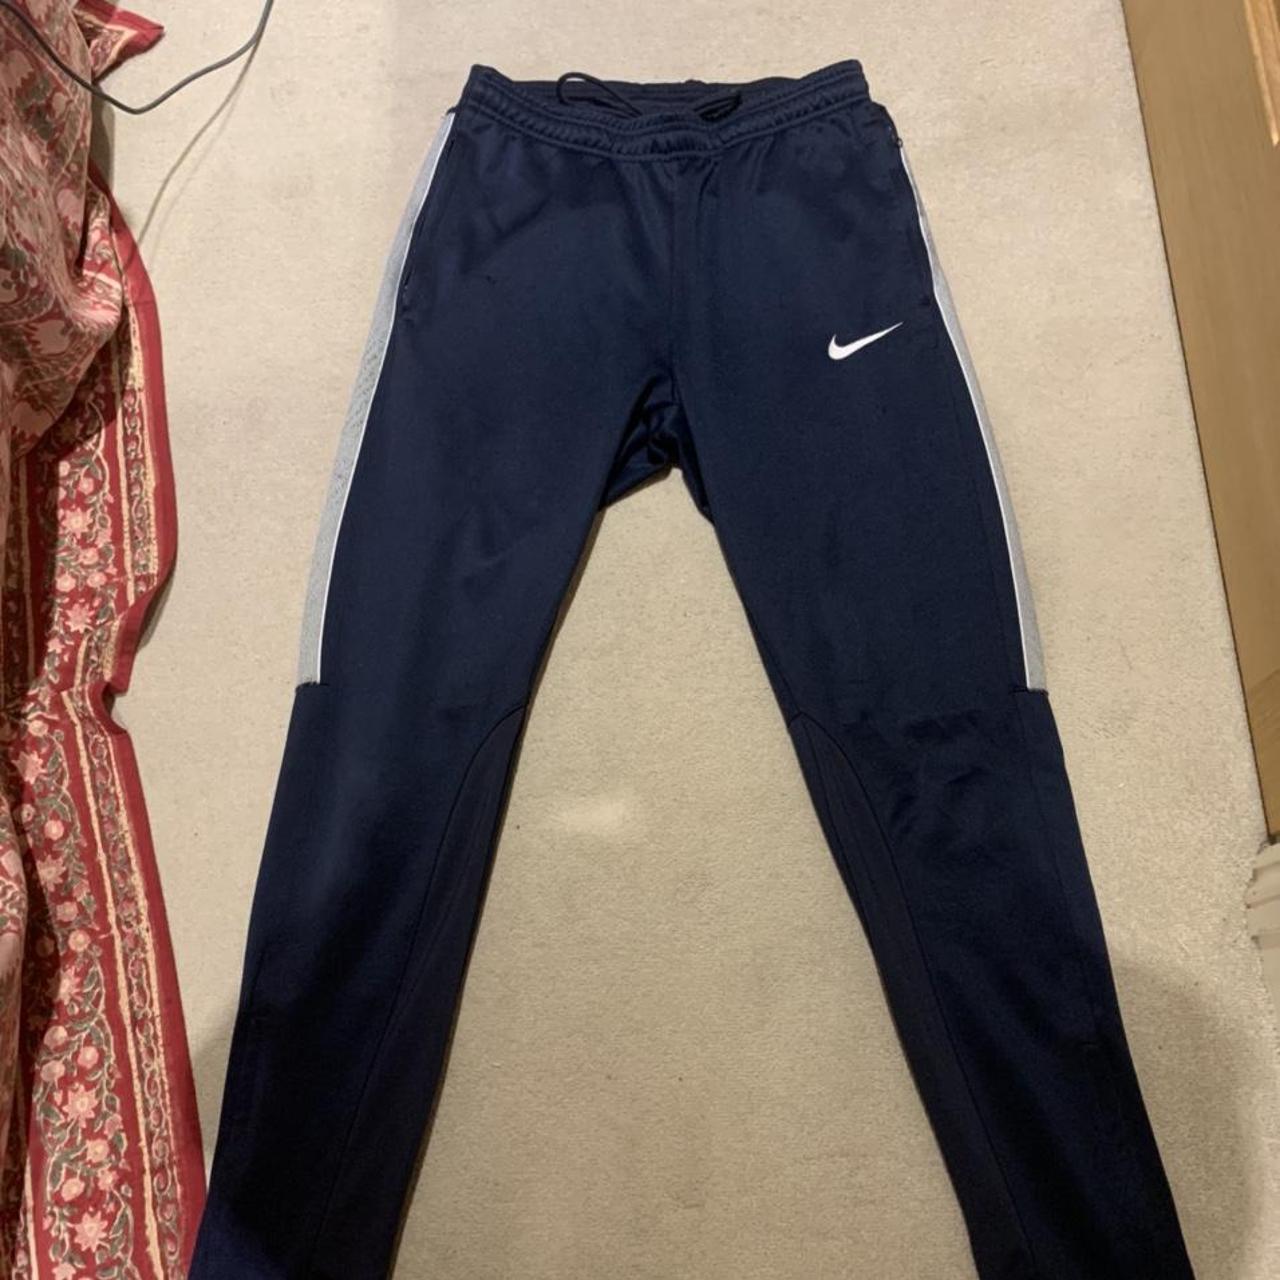 Nike Men's Navy and Blue Joggers-tracksuits | Depop